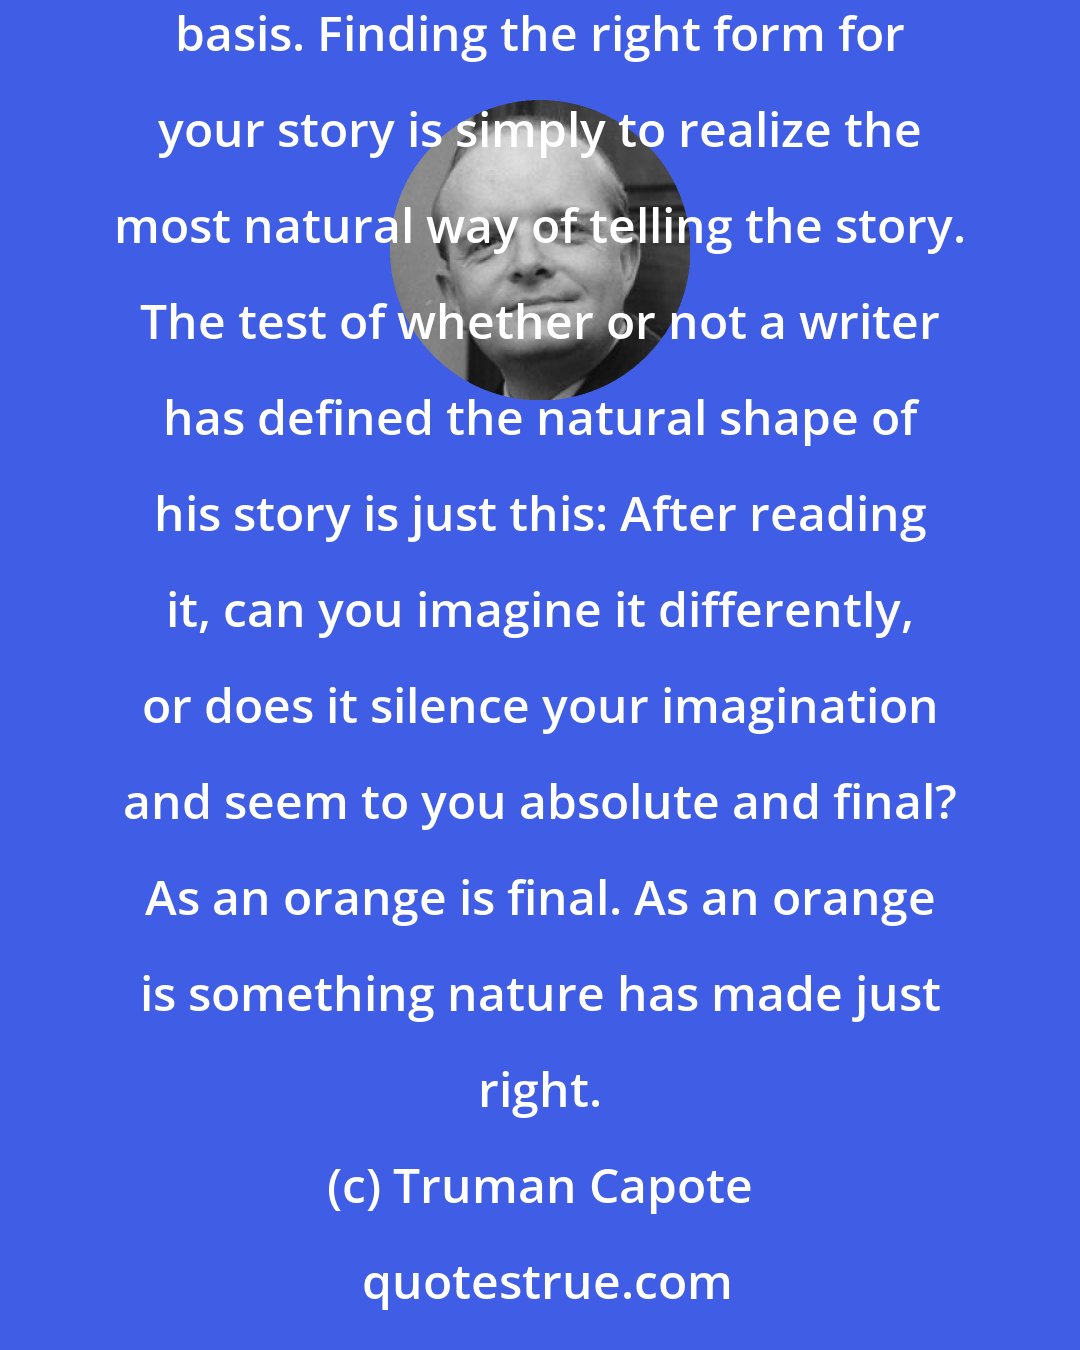 Truman Capote: Since each story presents its own technical problems, obviously one can't generalize about them on a two-times-two-equals-four basis. Finding the right form for your story is simply to realize the most natural way of telling the story. The test of whether or not a writer has defined the natural shape of his story is just this: After reading it, can you imagine it differently, or does it silence your imagination and seem to you absolute and final? As an orange is final. As an orange is something nature has made just right.